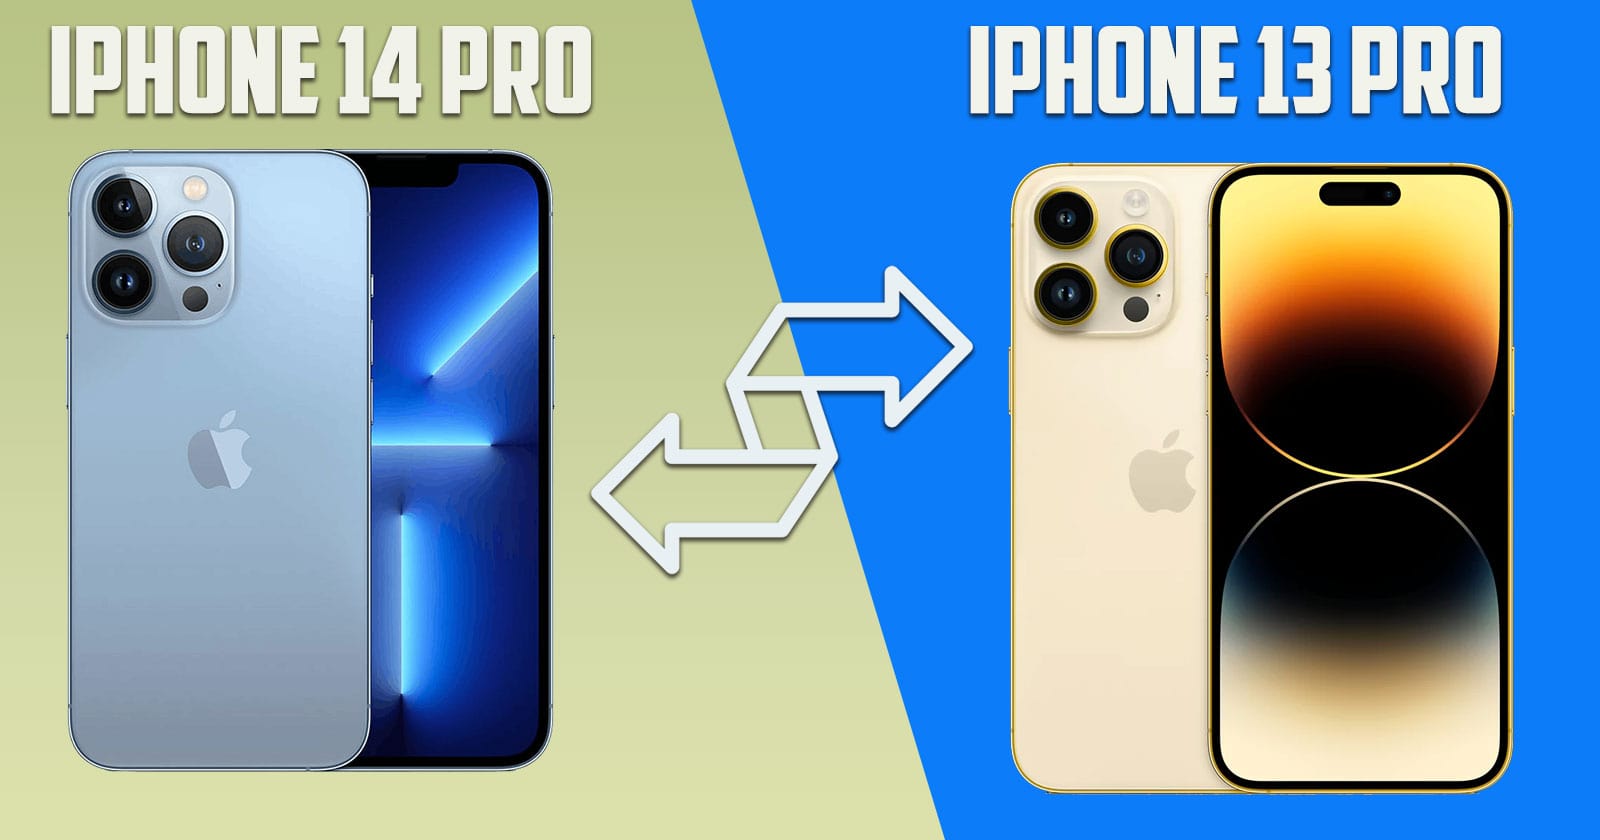 iPhone 13 Pro and iPhone 14 Pro Comparison